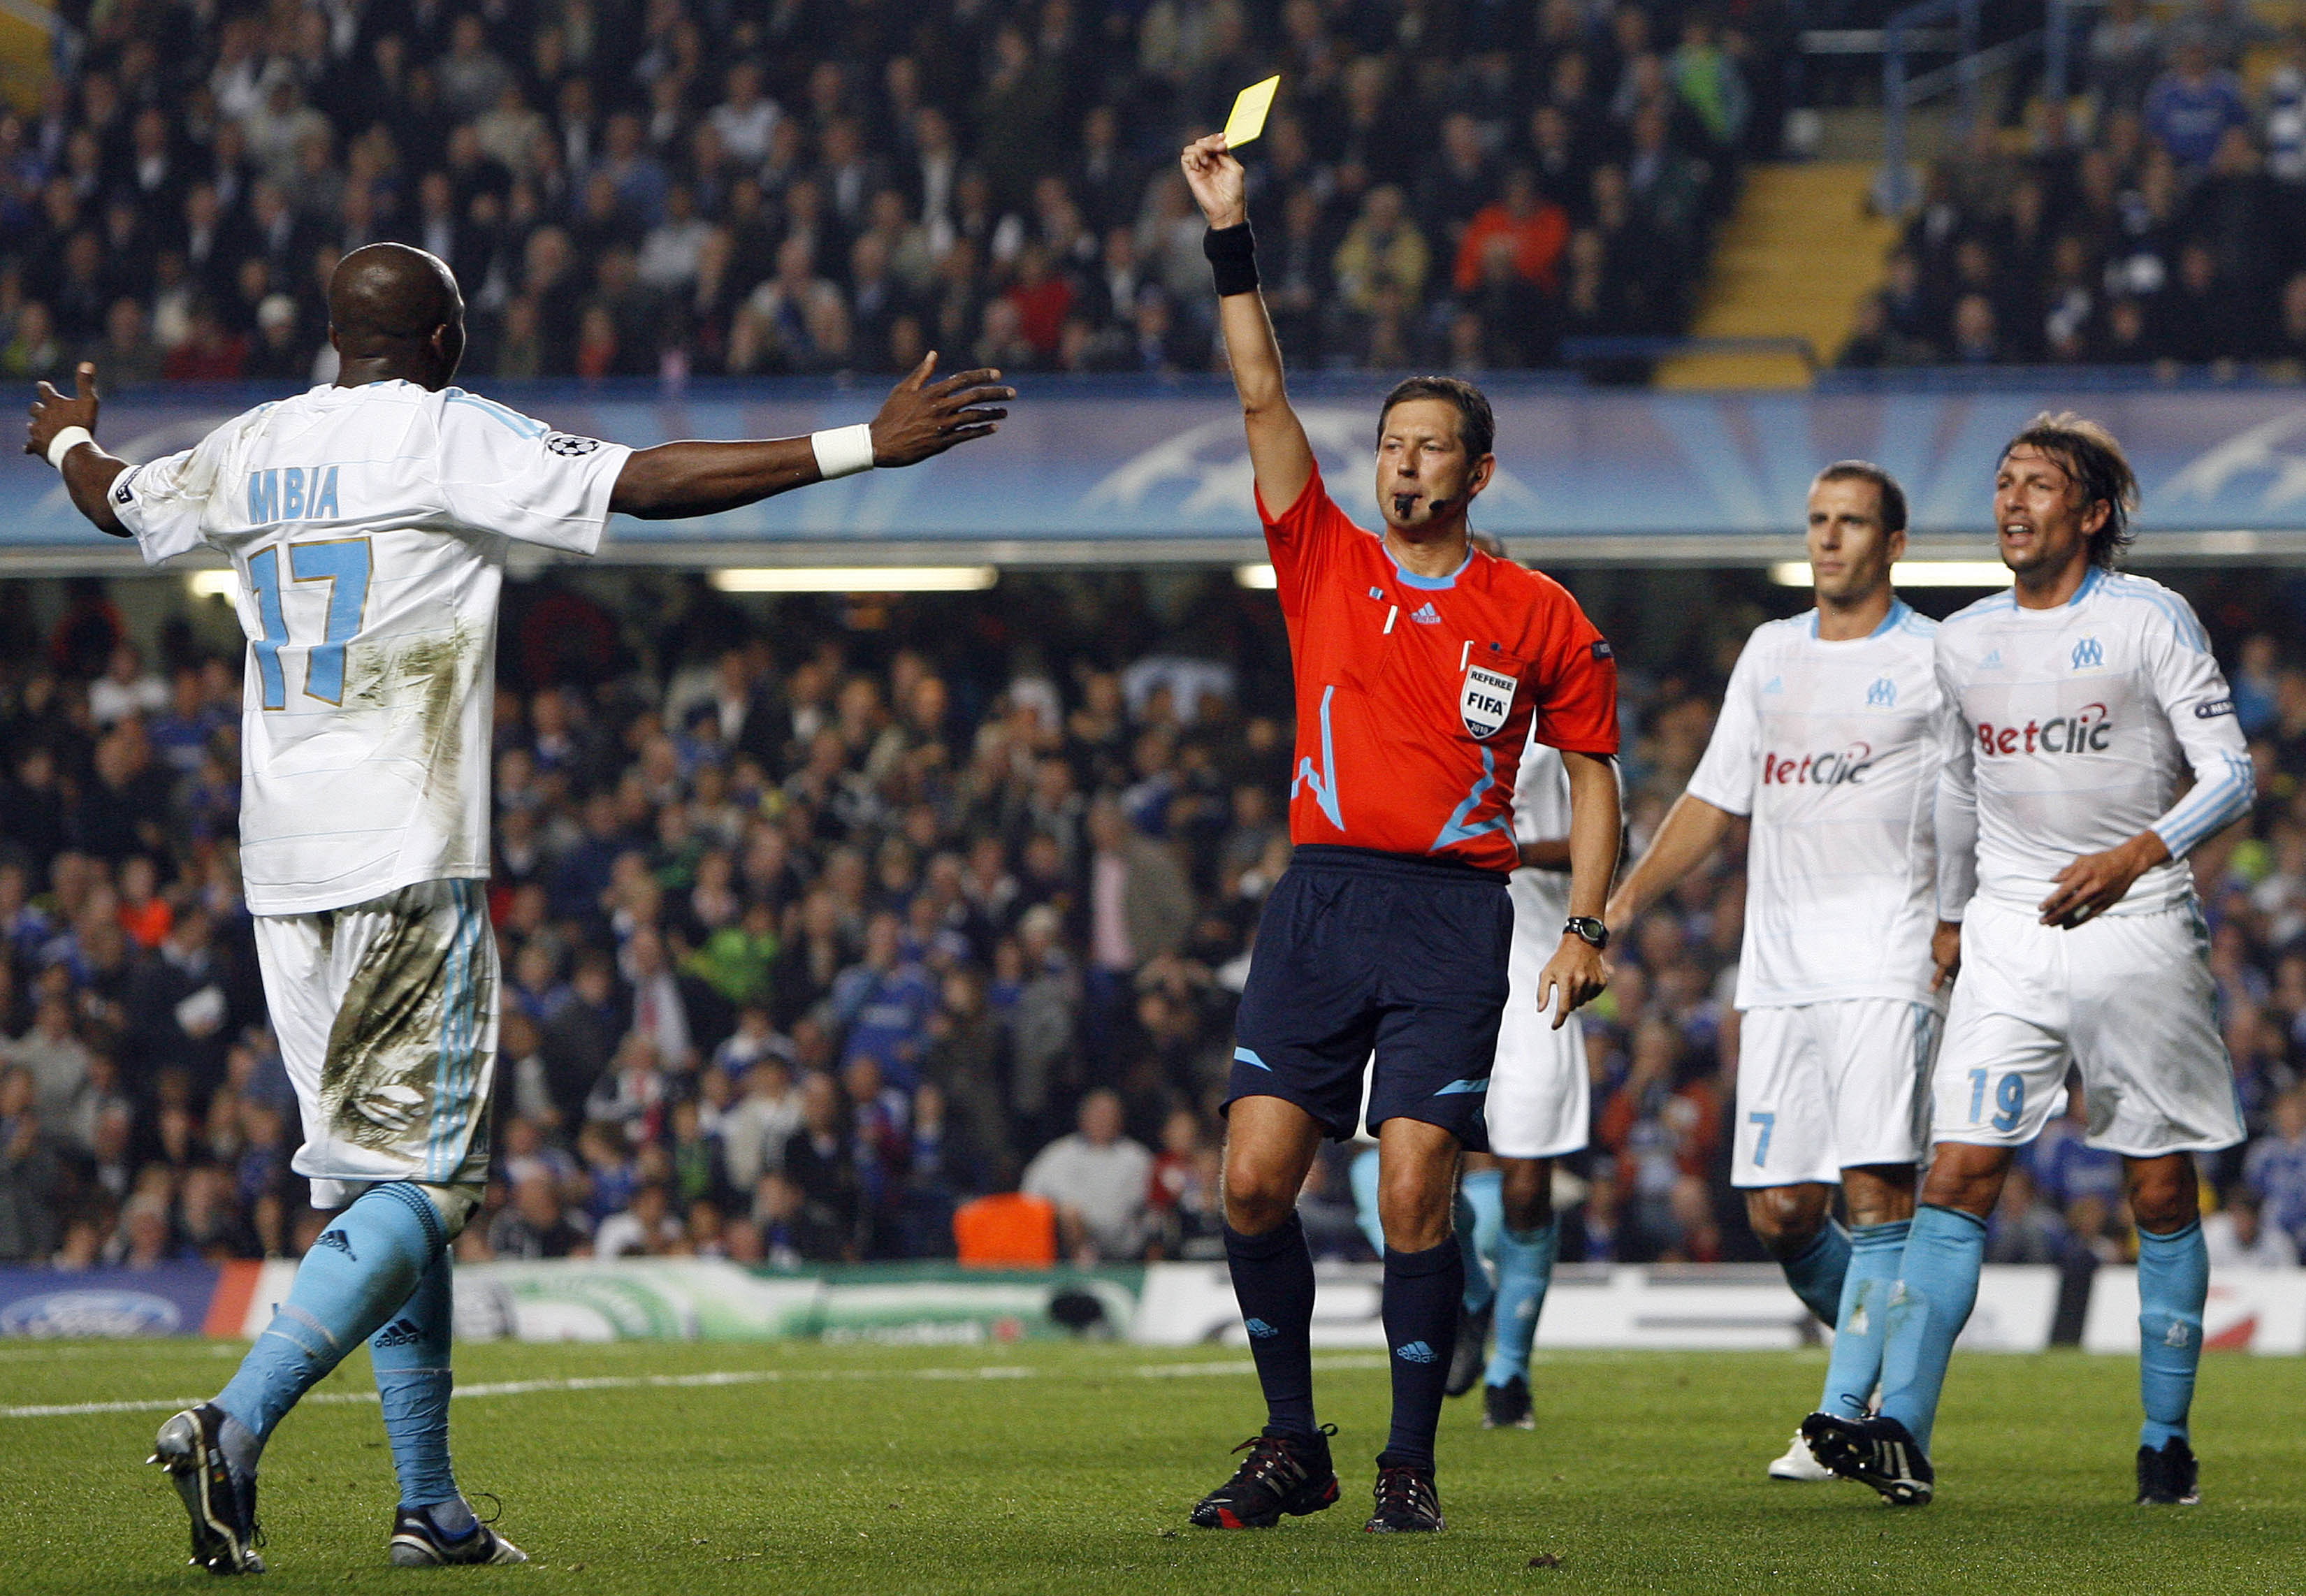 LONDON, ENGLAND - SEPTEMBER 28 :   Stephane Mbia of Marseille(L) shows his disappointment to Referee, Frank de Bleeckere after conceding a penalty for handball during the UEFA Champions League Group F match between Chelsea and Marseille at Stamford Bridge